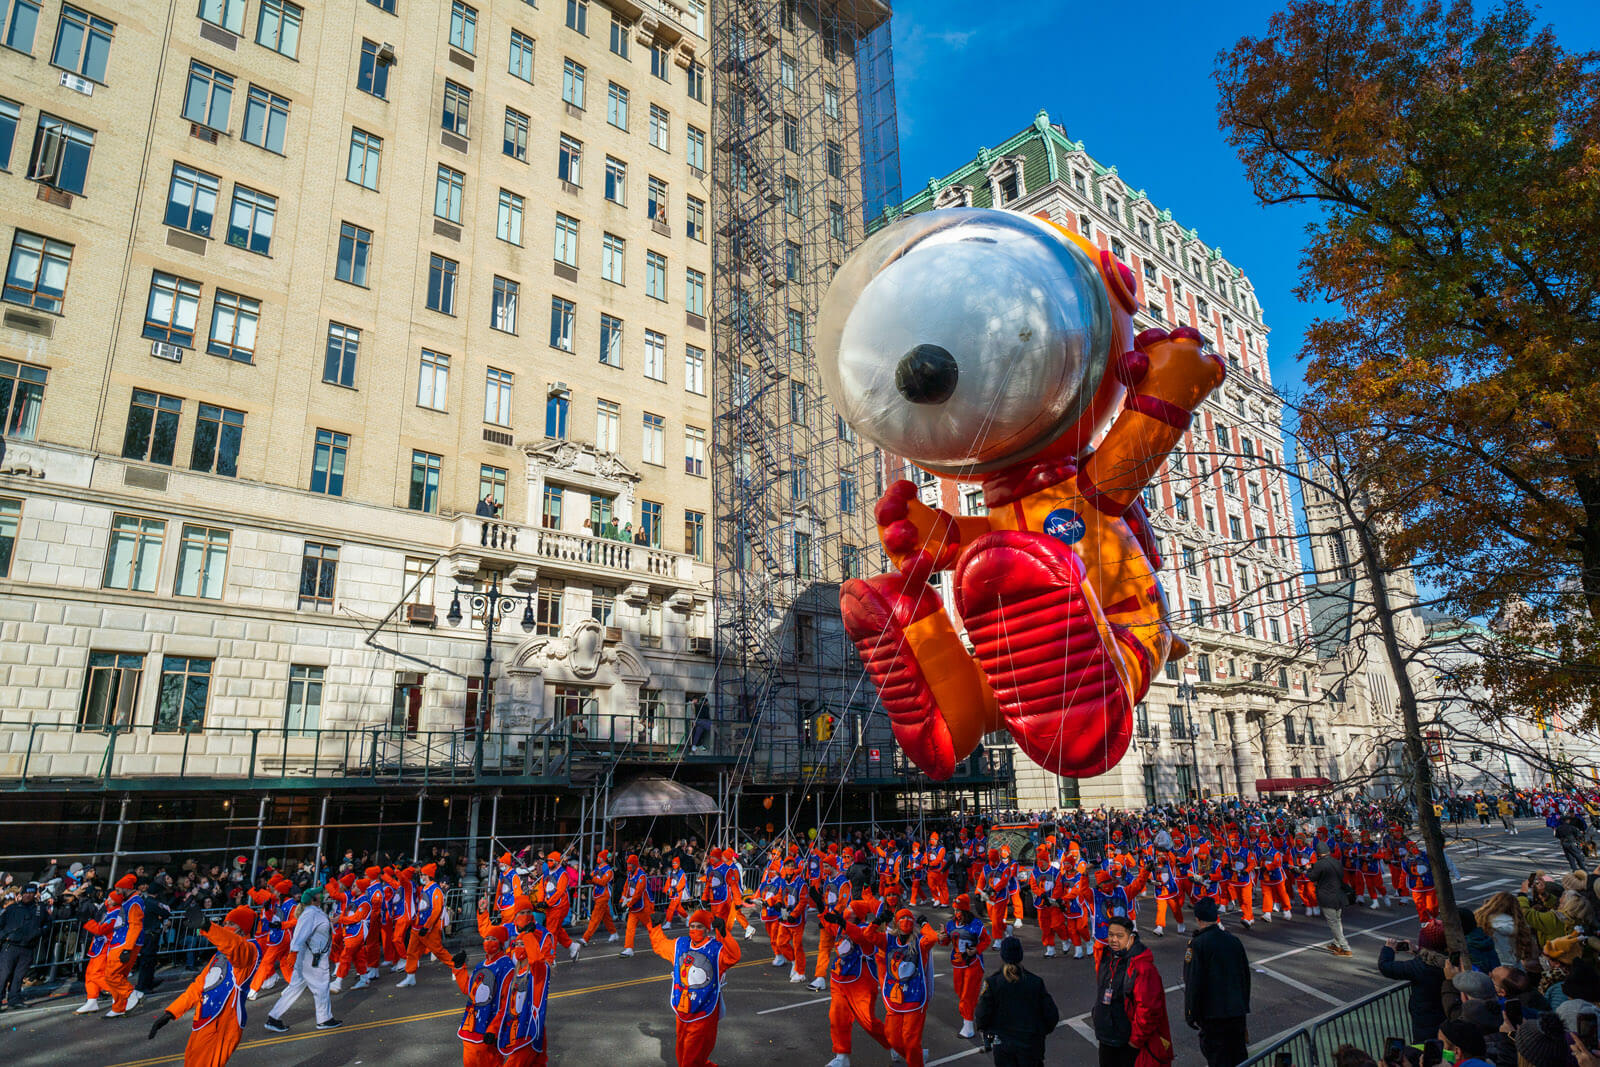 Snoopy's Balloon at the 2021 Macy's Thanksgiving Day Parade in NYC